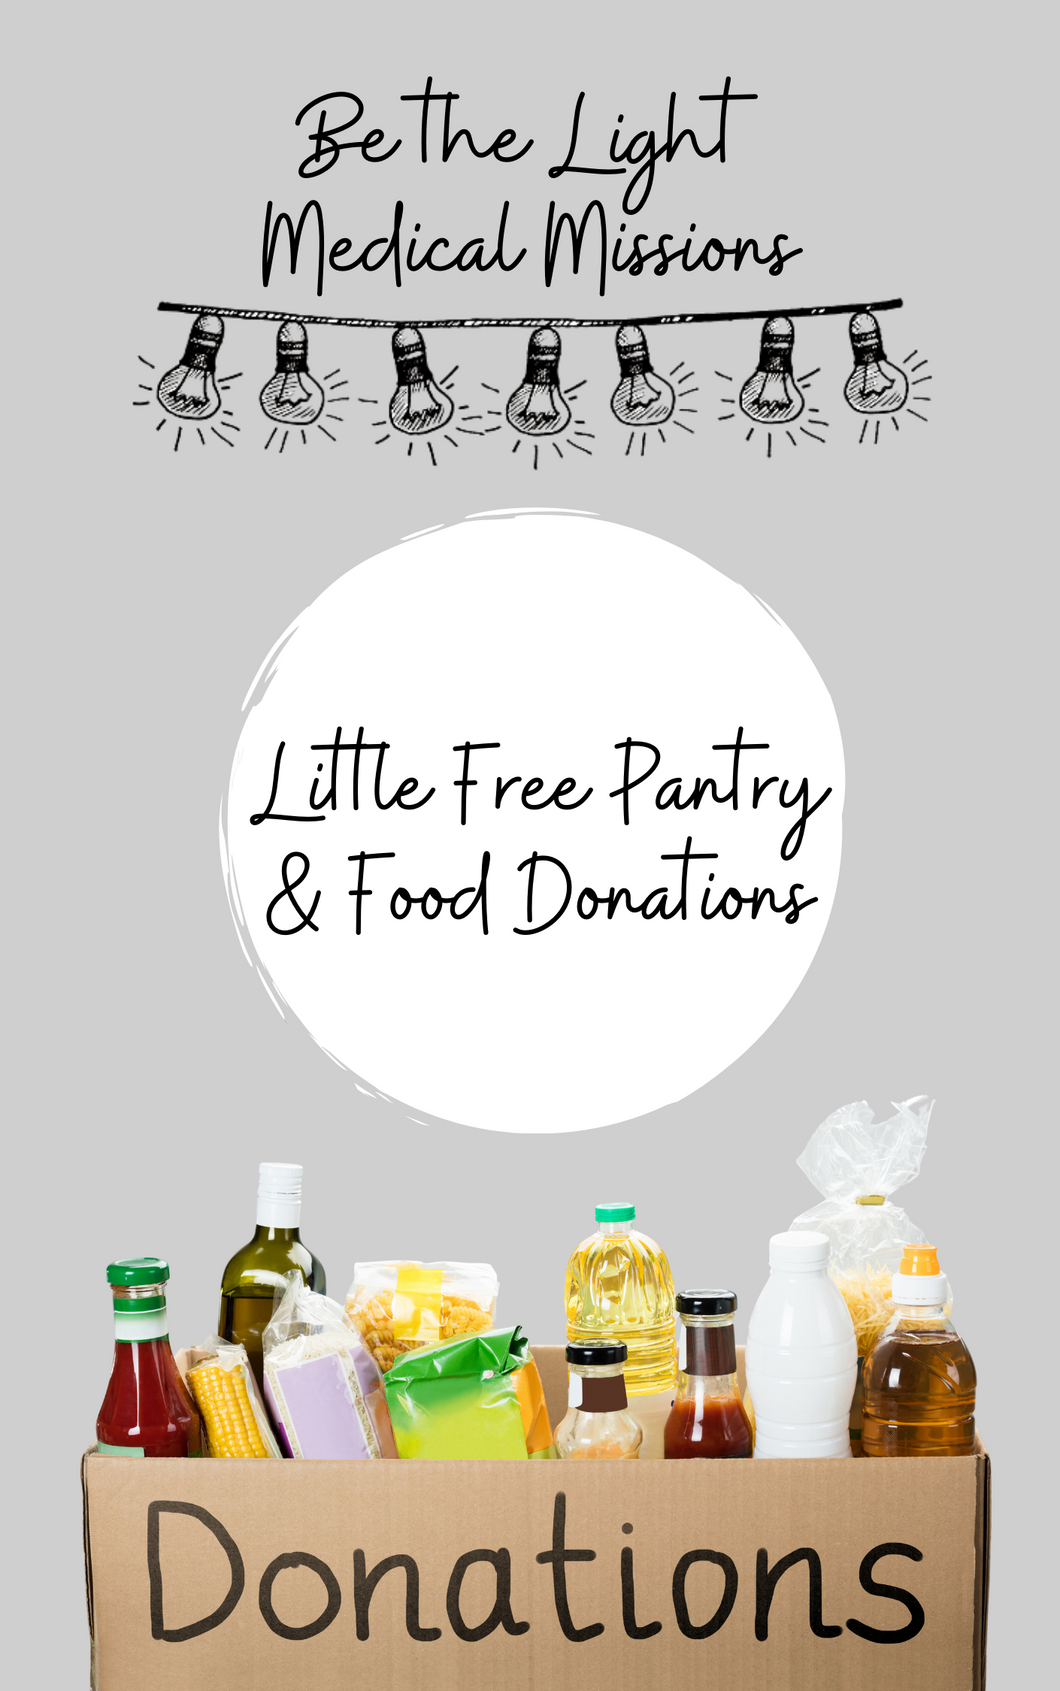 Be the Light- Little Food Pantry Donation